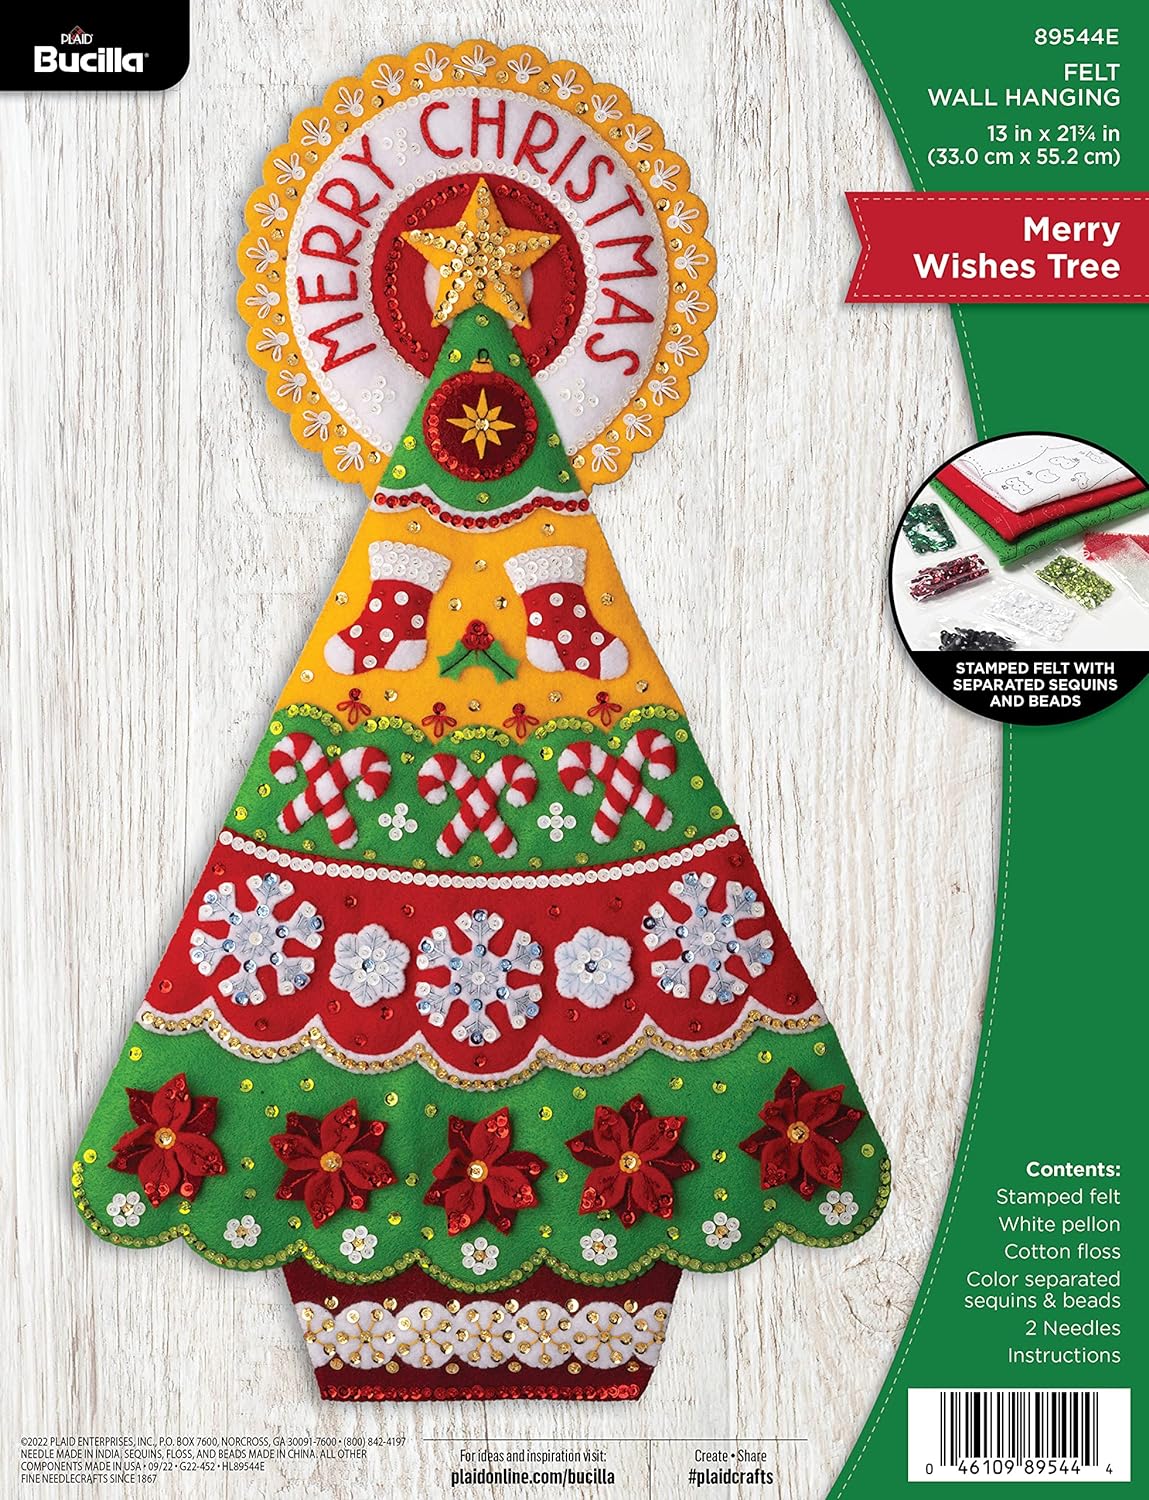 Merry Wishes Felt Wallhanging Kit